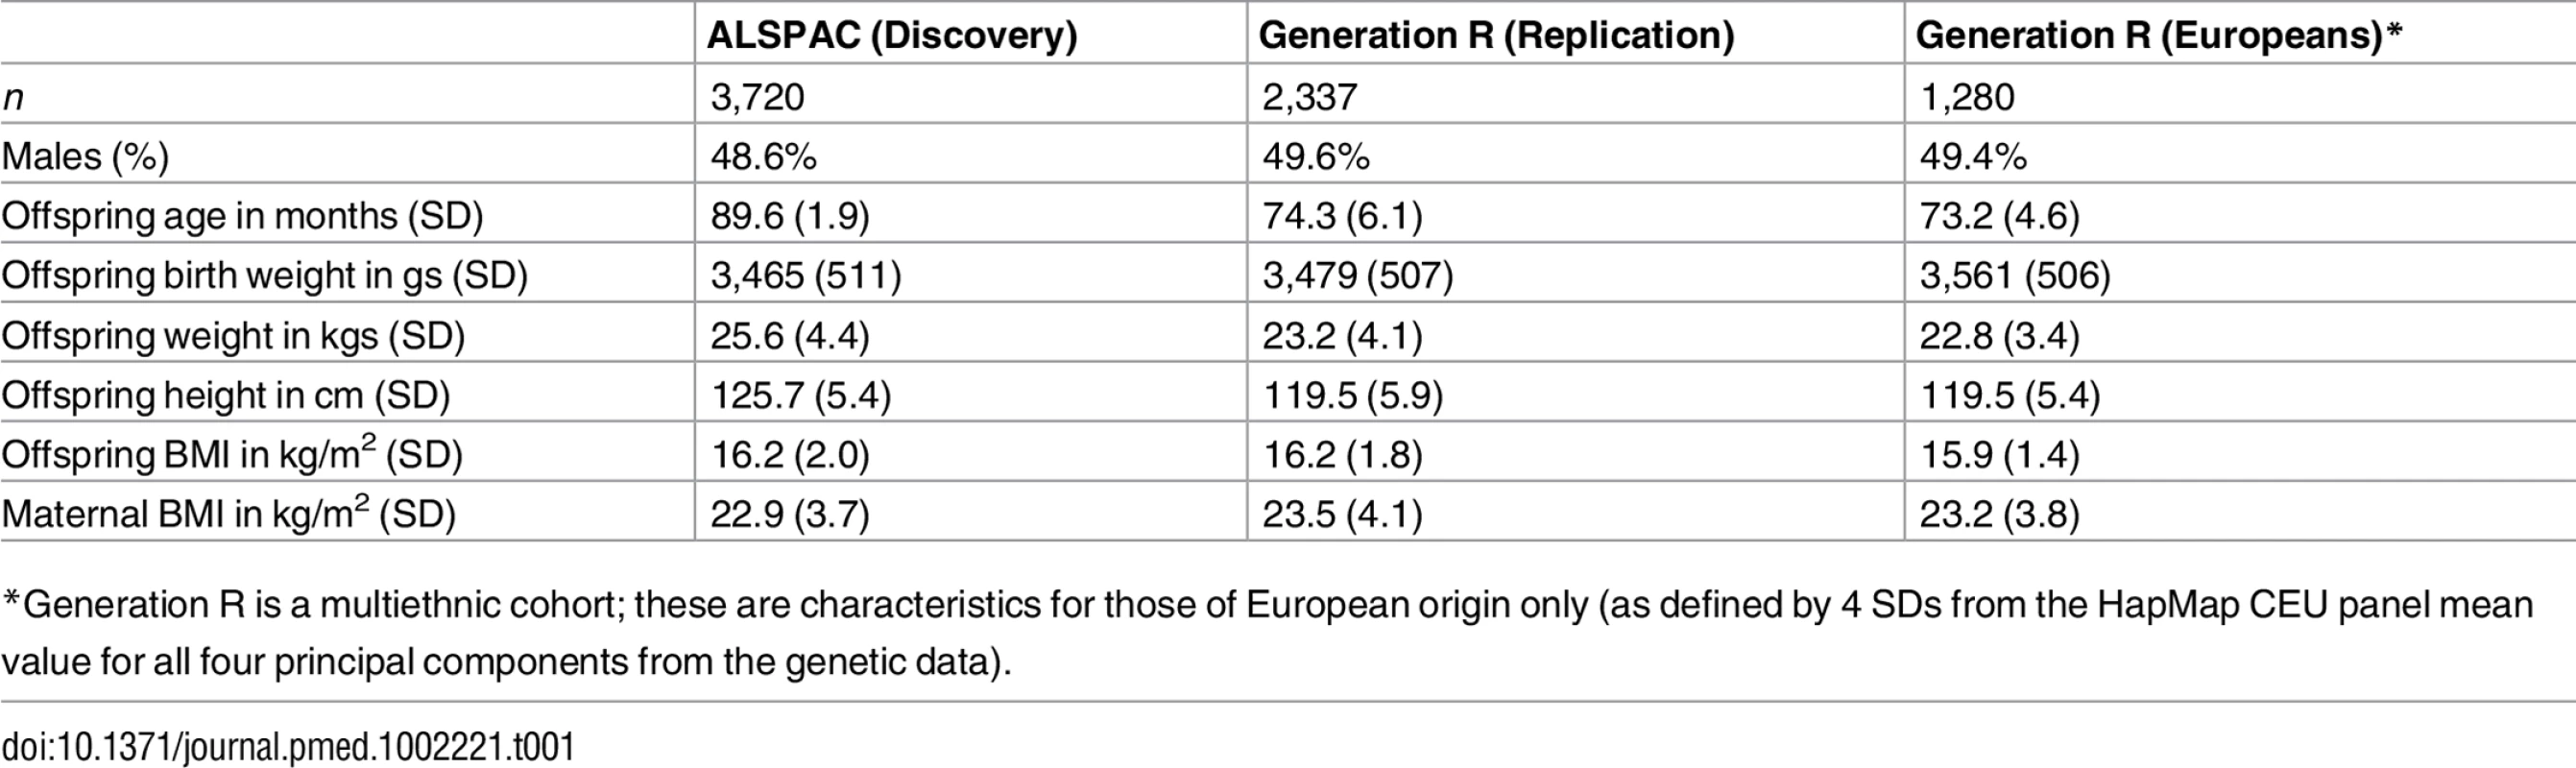 Characteristics of the offspring and their mothers in the Discovery and Replication cohorts.